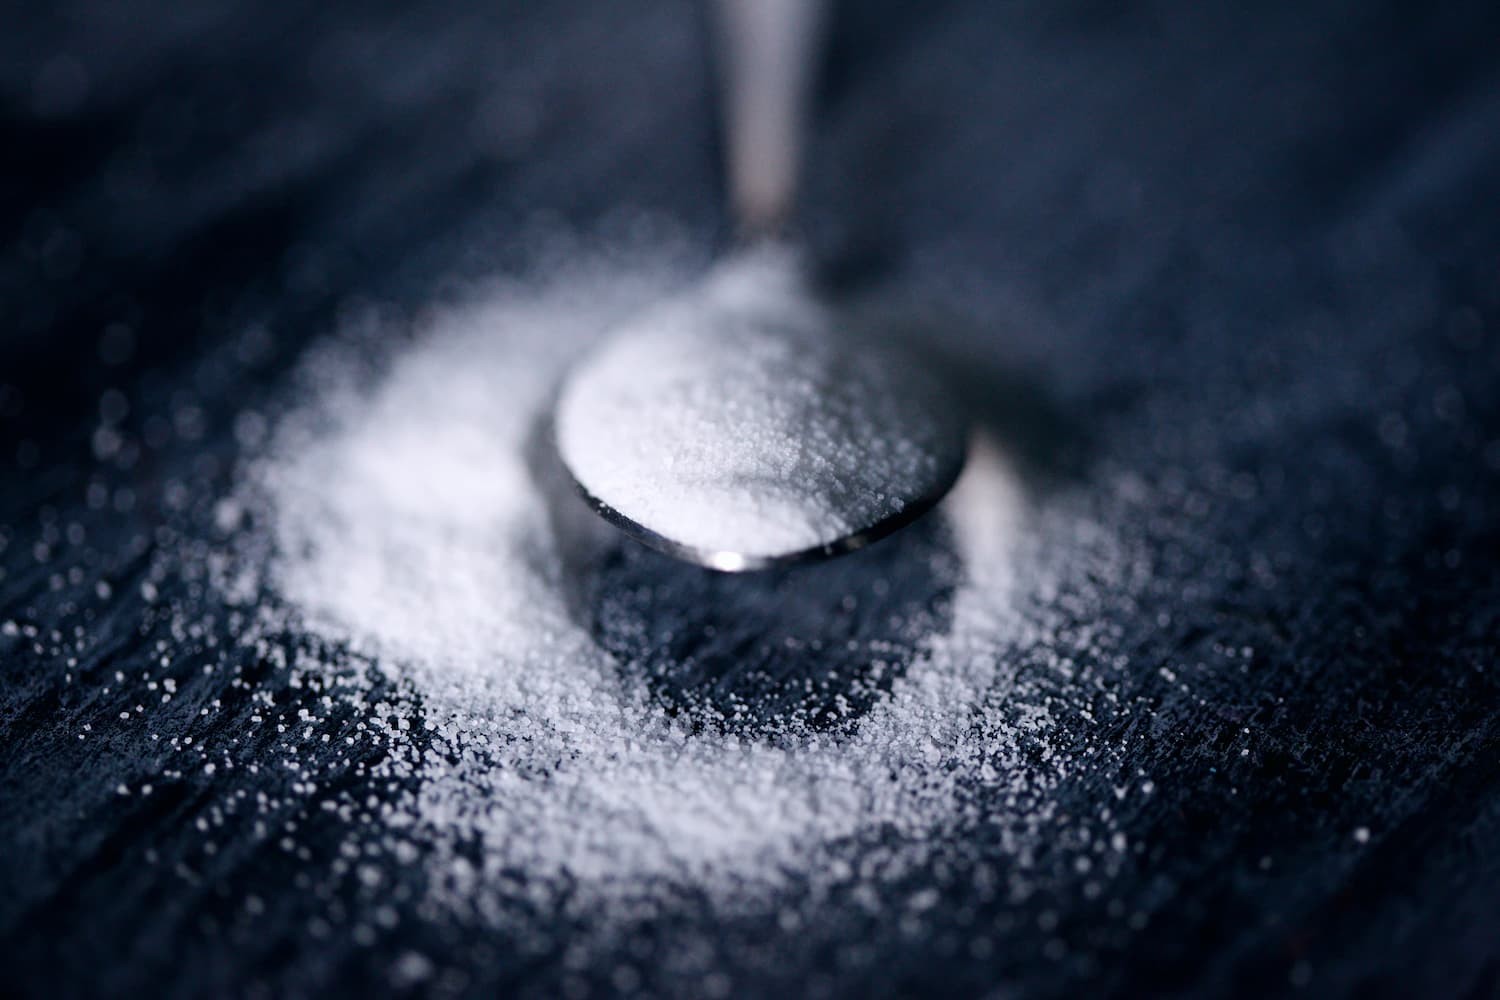 How Toxic is Sugar?